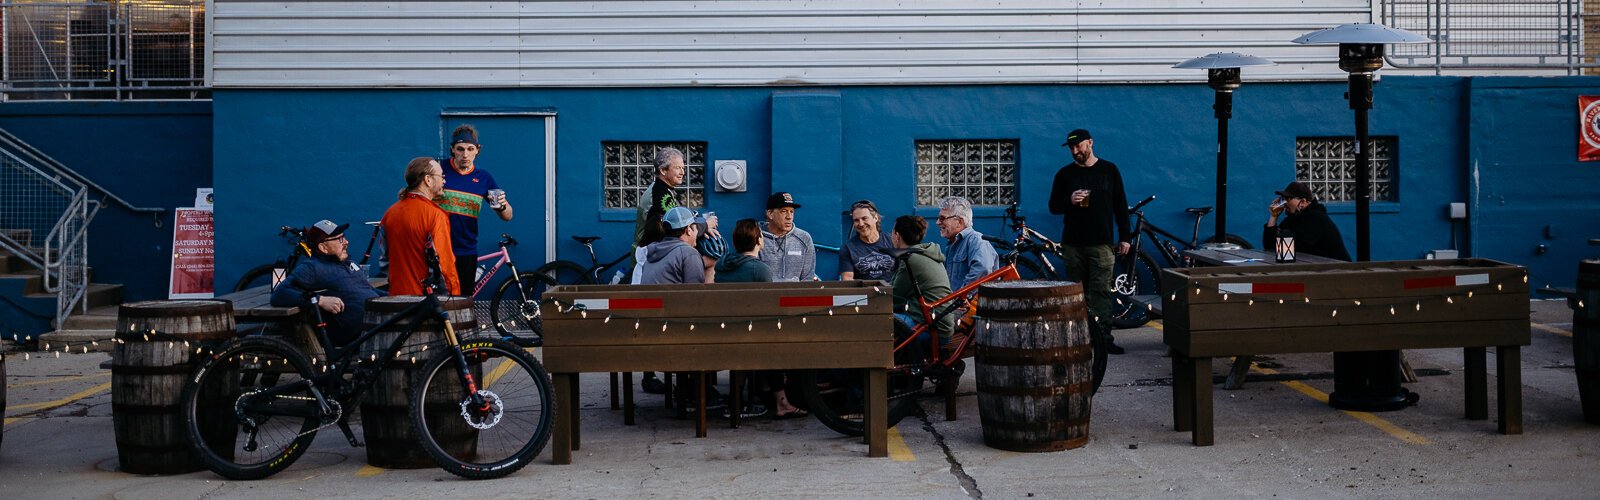 Members of the cycling group Spoke Junkies gather outside River's Edge Brewing Company in Milford after their bi-weekly ride.